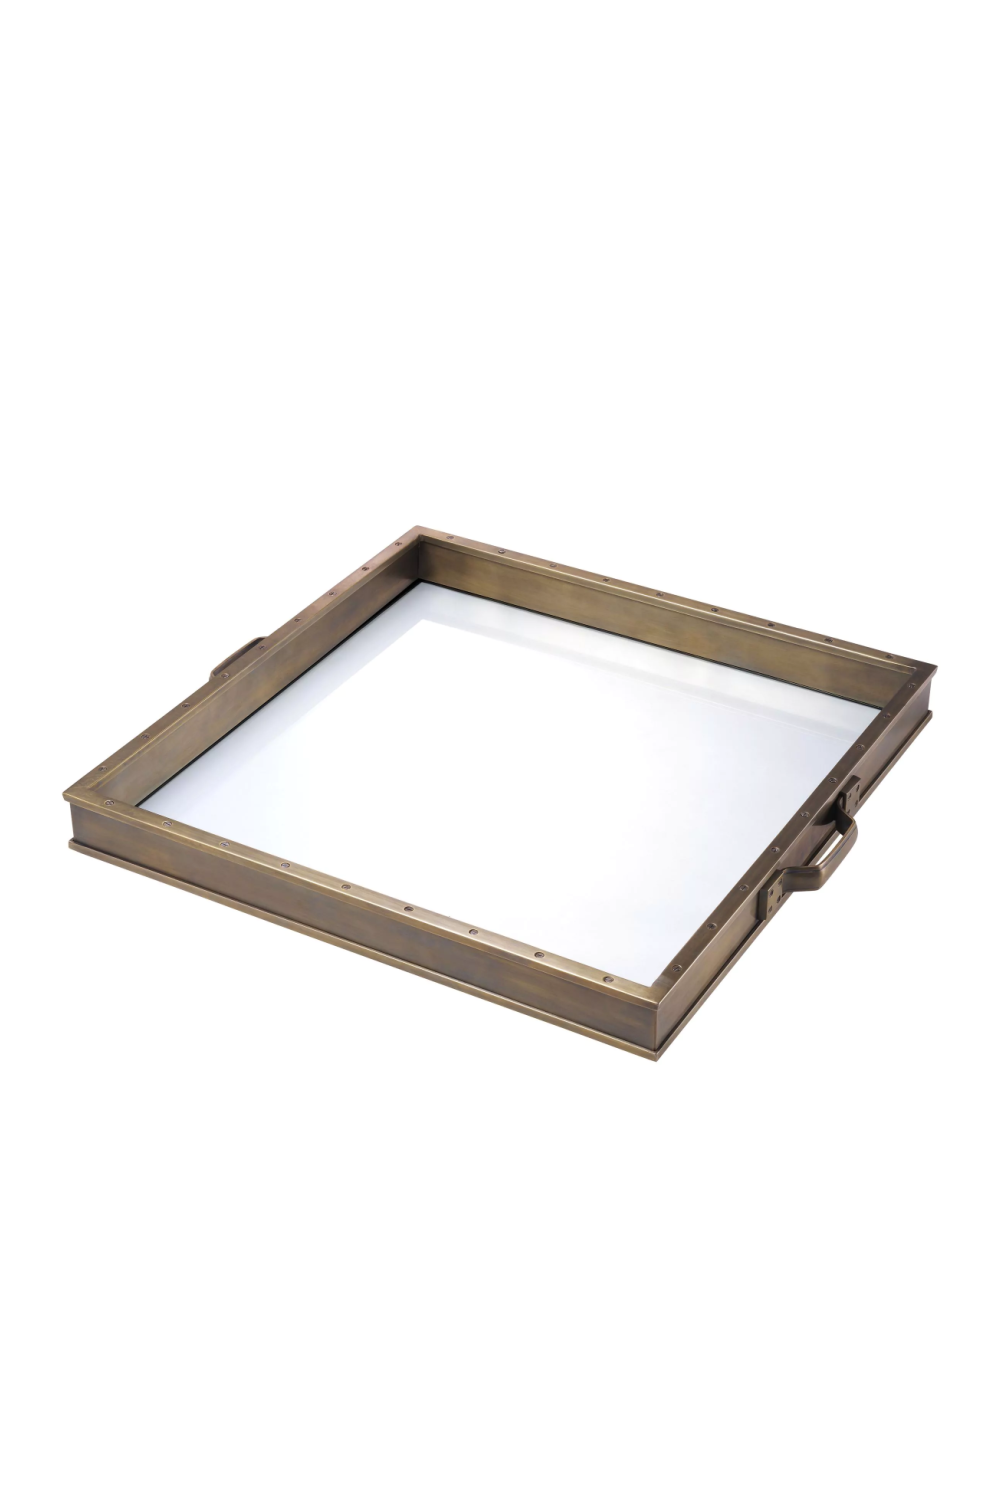 Framed Glass Tray L | Eichholtz Trouvaille | OROA.com